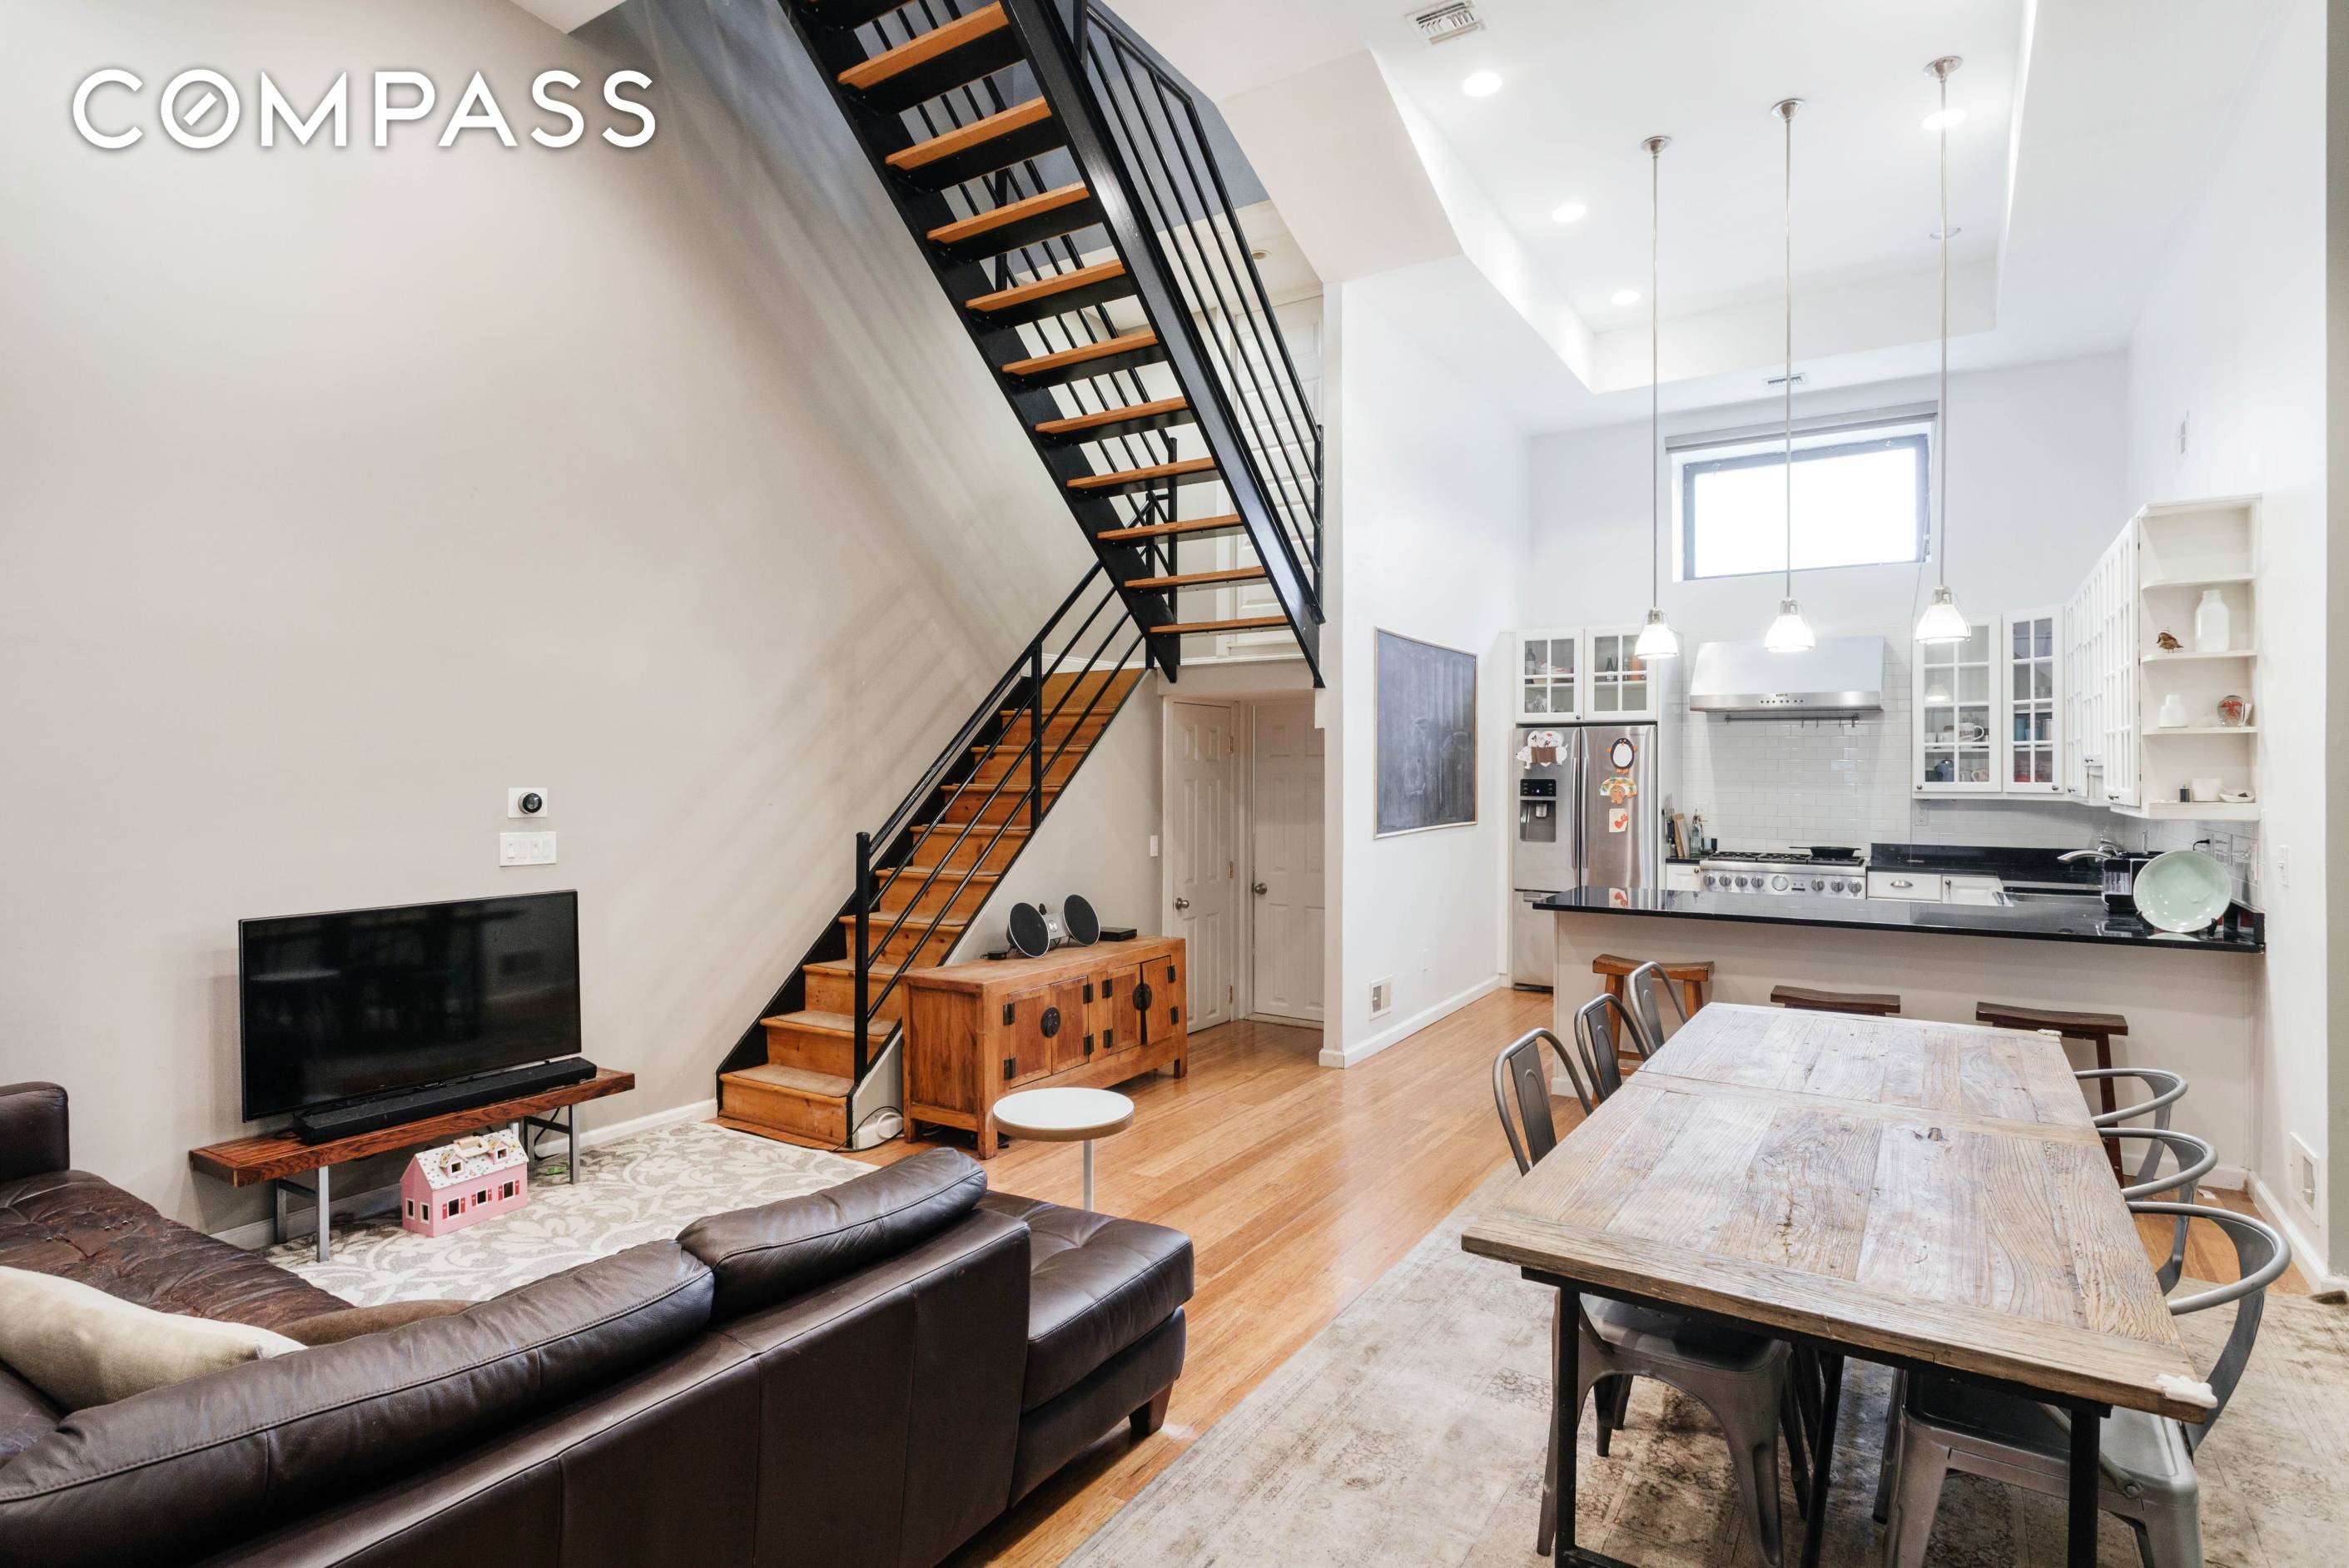 This three story brick single carriage house is sophisticated and serene.